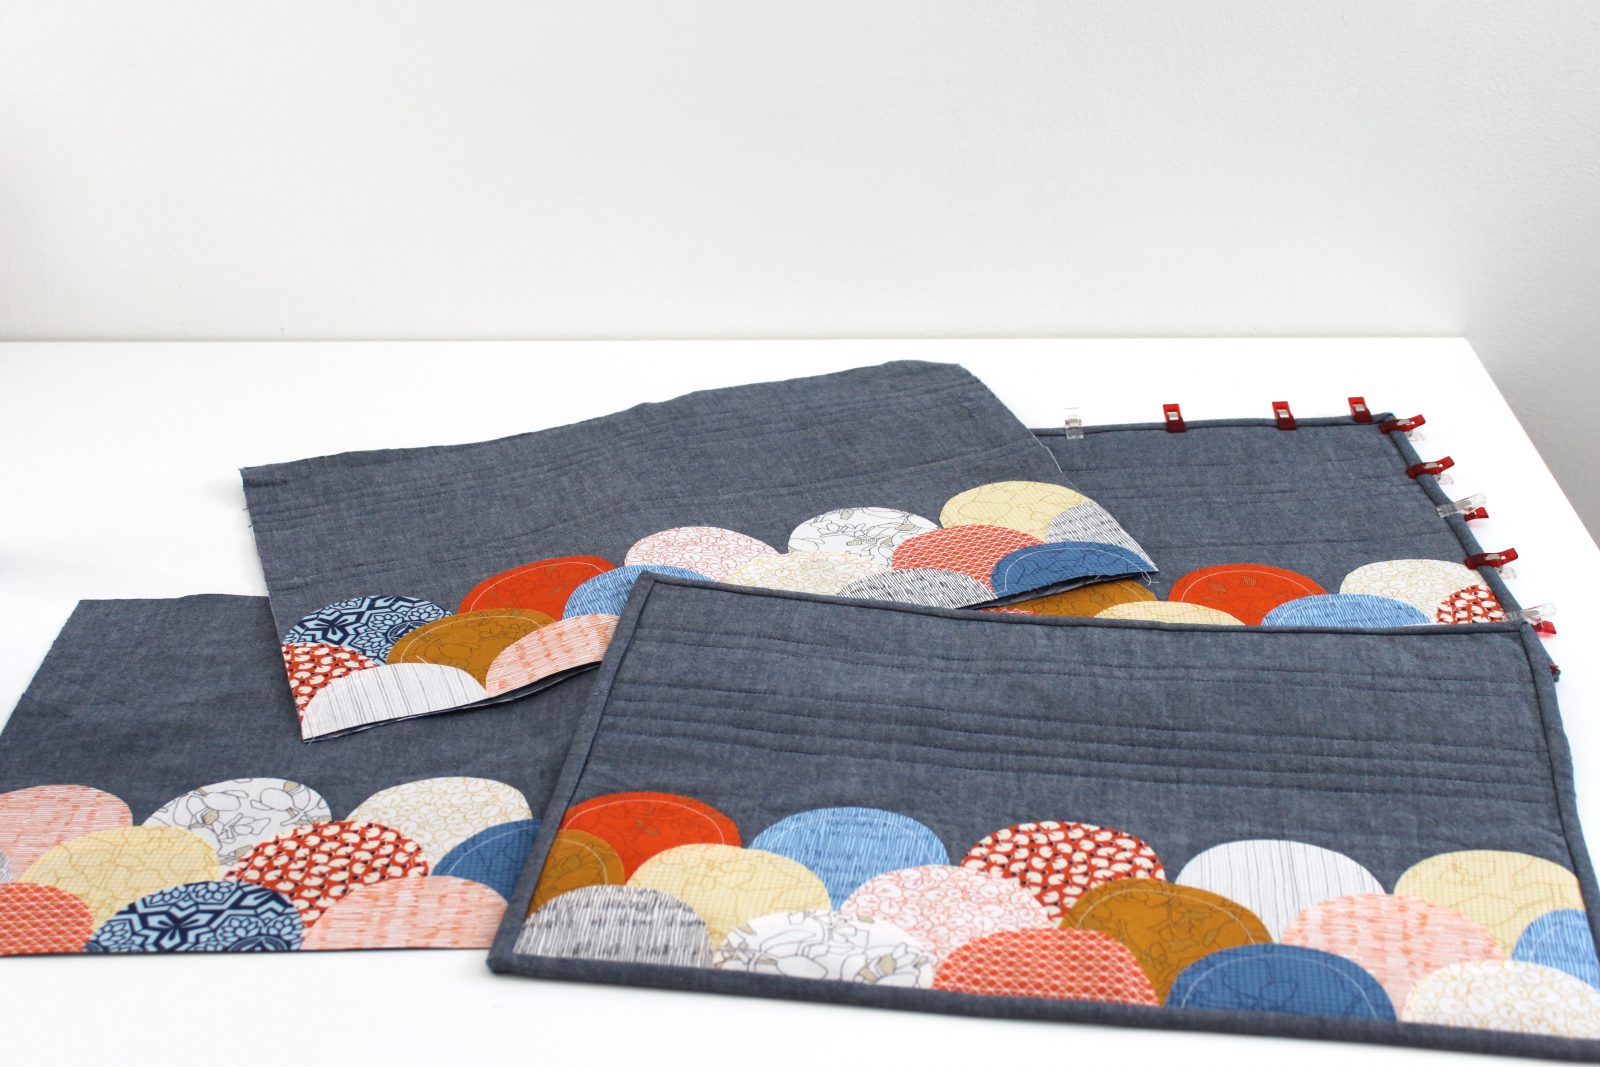 Clamshell Placemats by Kim Soper/Leland Ave Studios